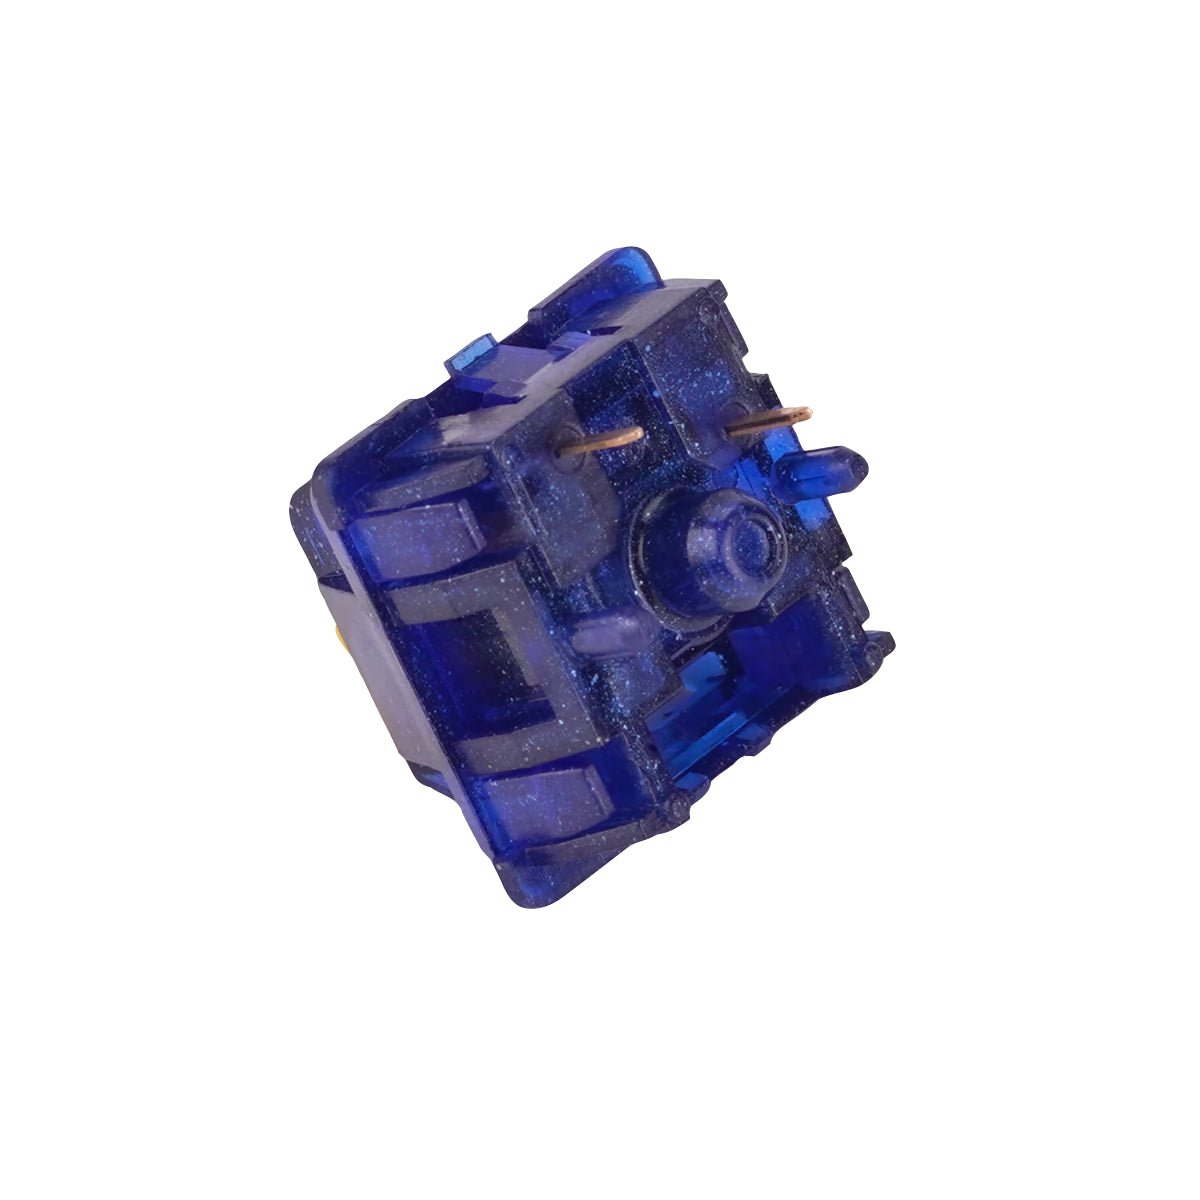 KBD Fans Tecsee Switches - Sapphire - Store 974 | ستور ٩٧٤